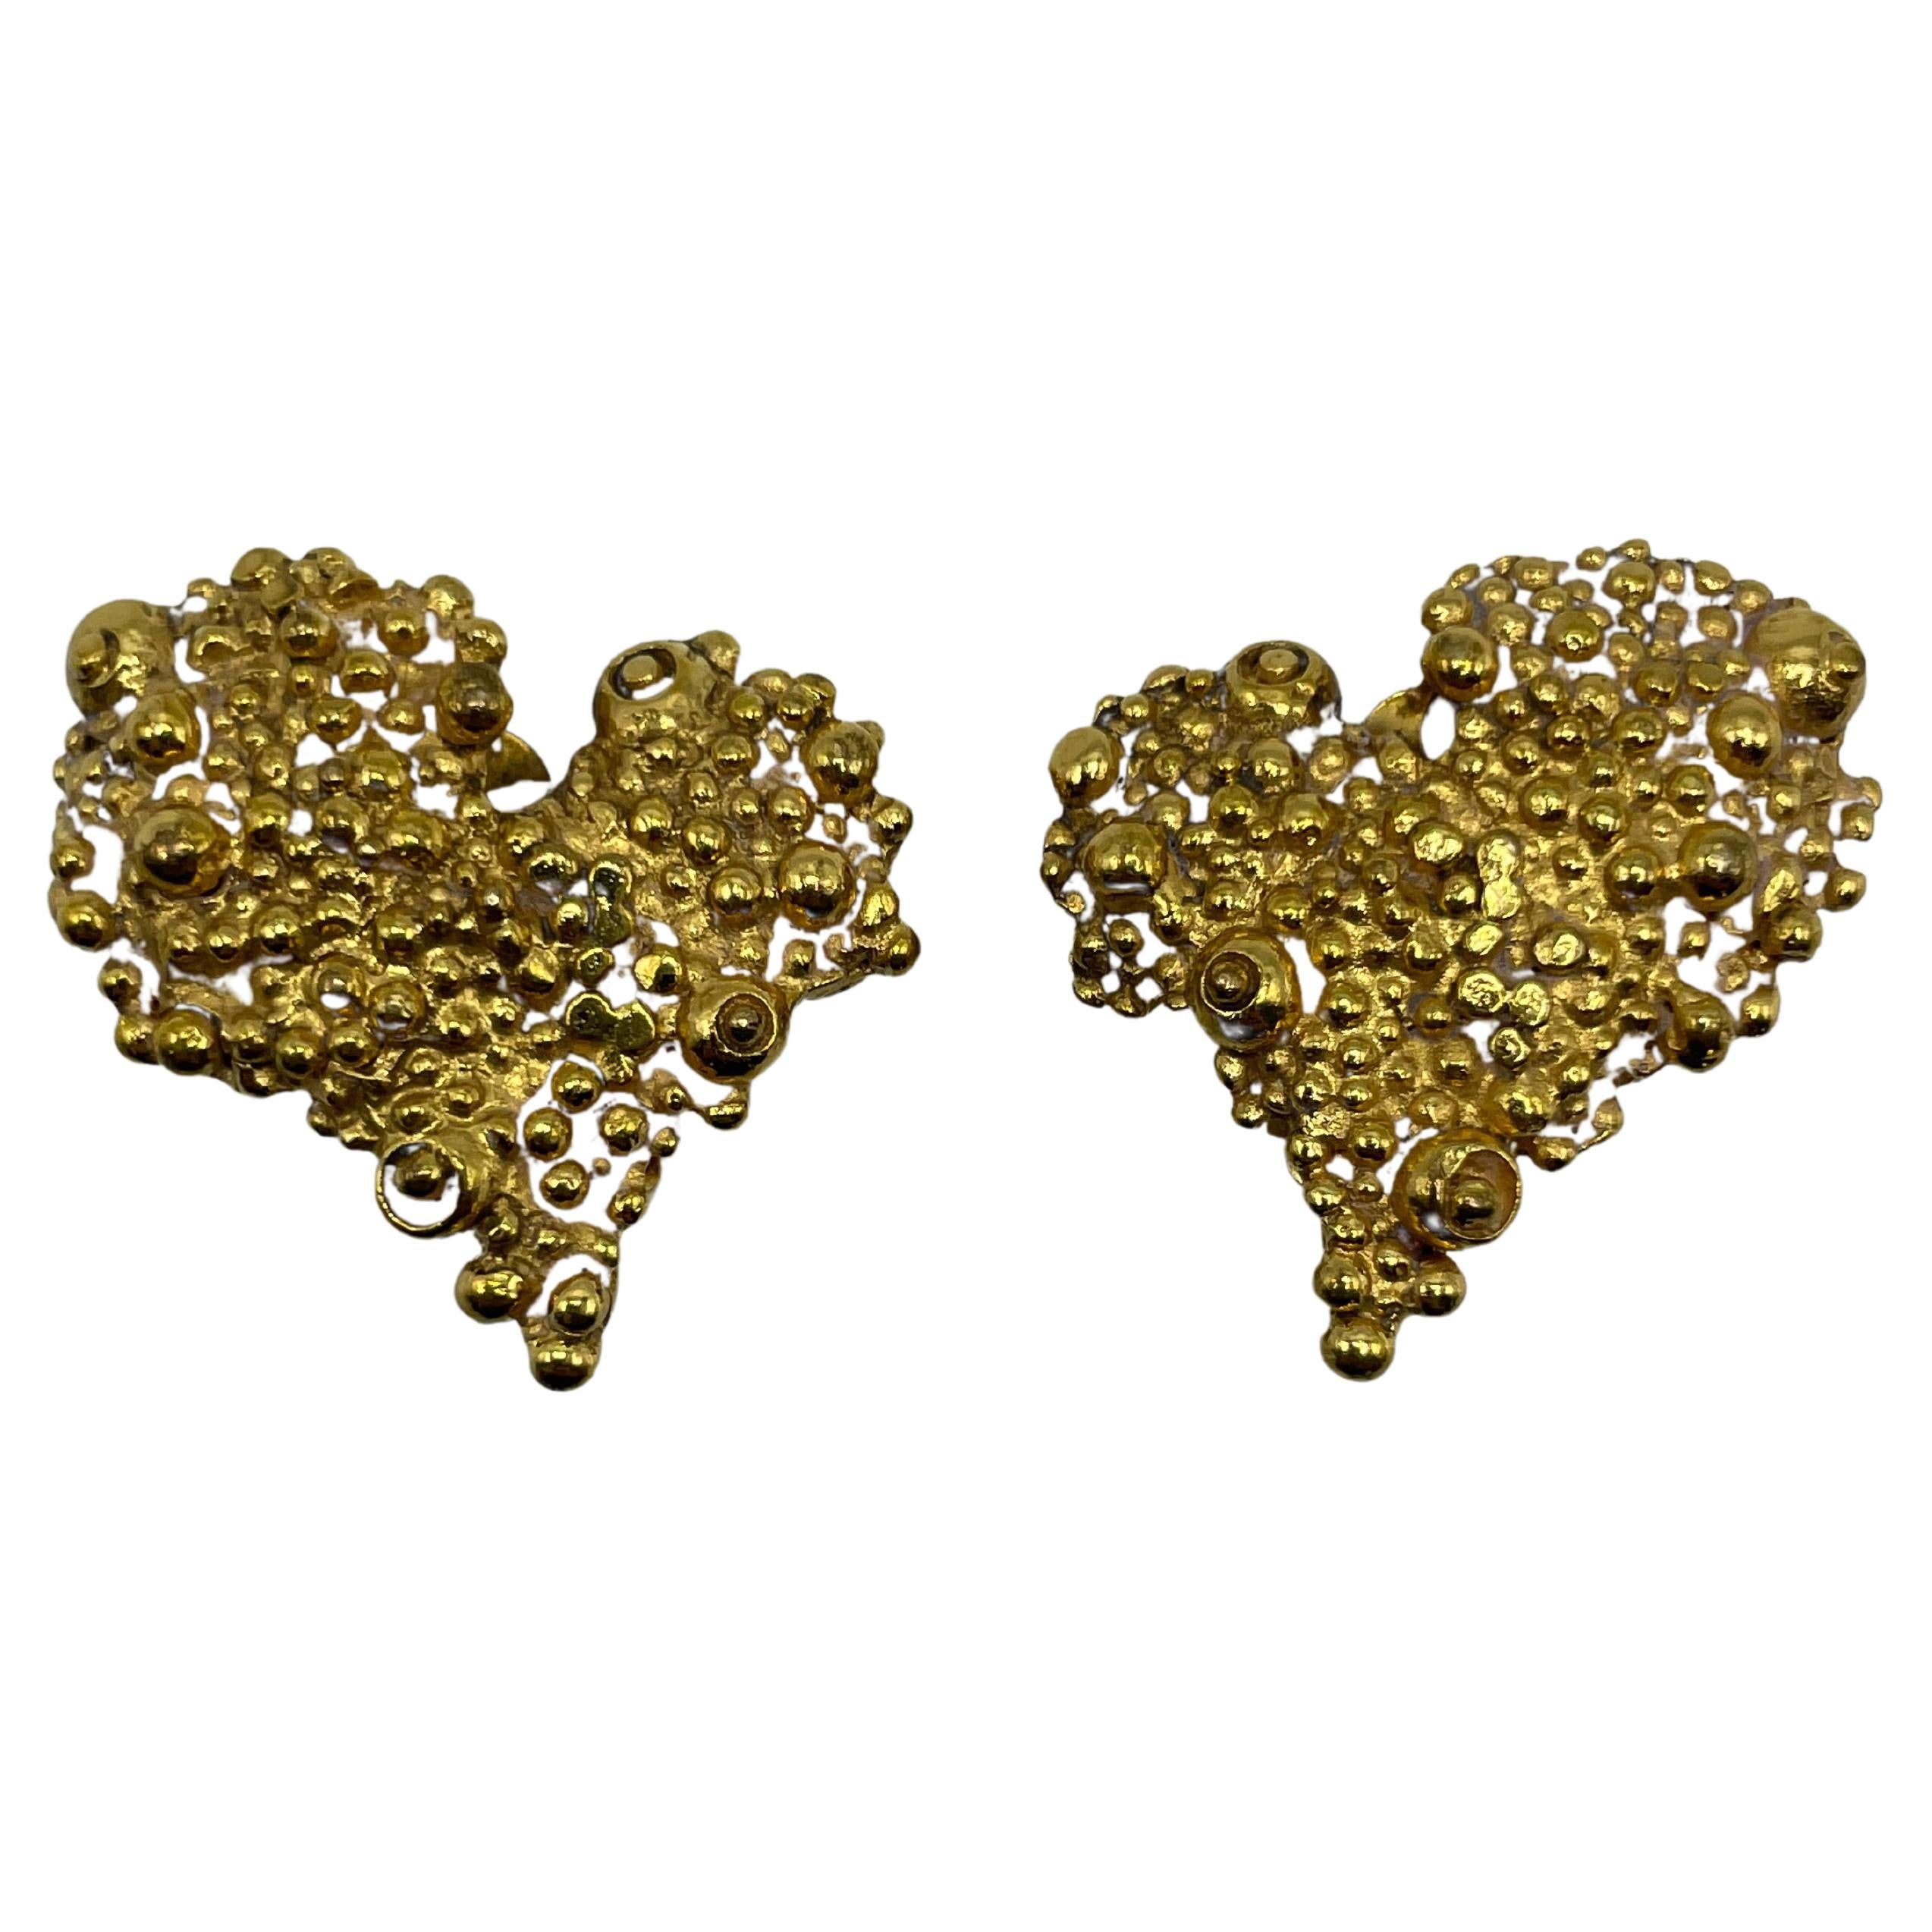 Christian Lacroix heart shaped gold toned clip-on earrings. The heart-shaped pattern on the earrings, which Christian Lacroix frequently employed to create his jewelry, is a representation of his creative aesthetic. Made in France and bearing the